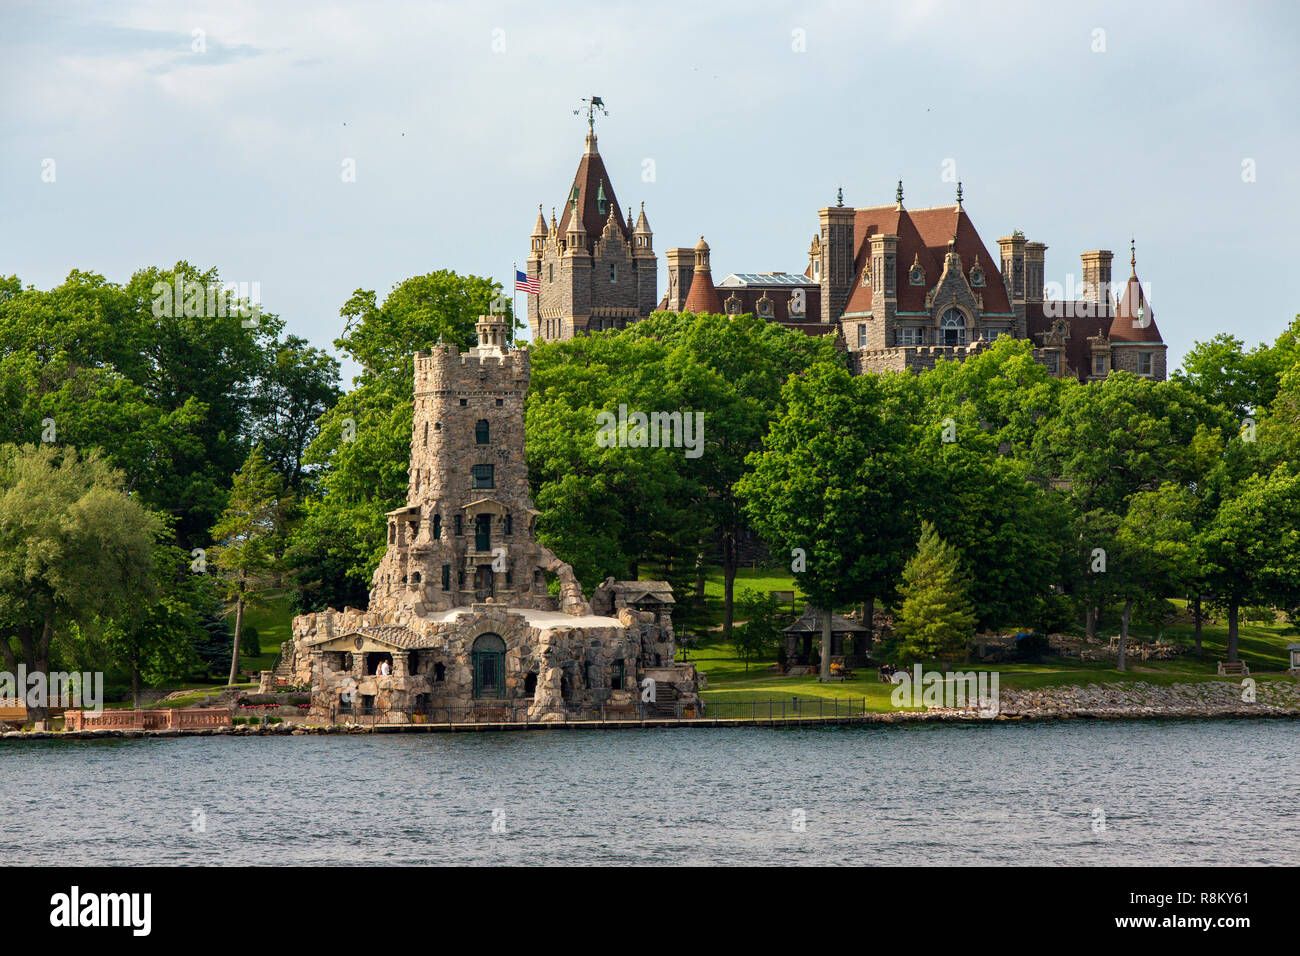 United States, New York state, Thousand Islands Archipelago on the St. Lawrence River, Boldt Castle on Heart Island Stock Photo